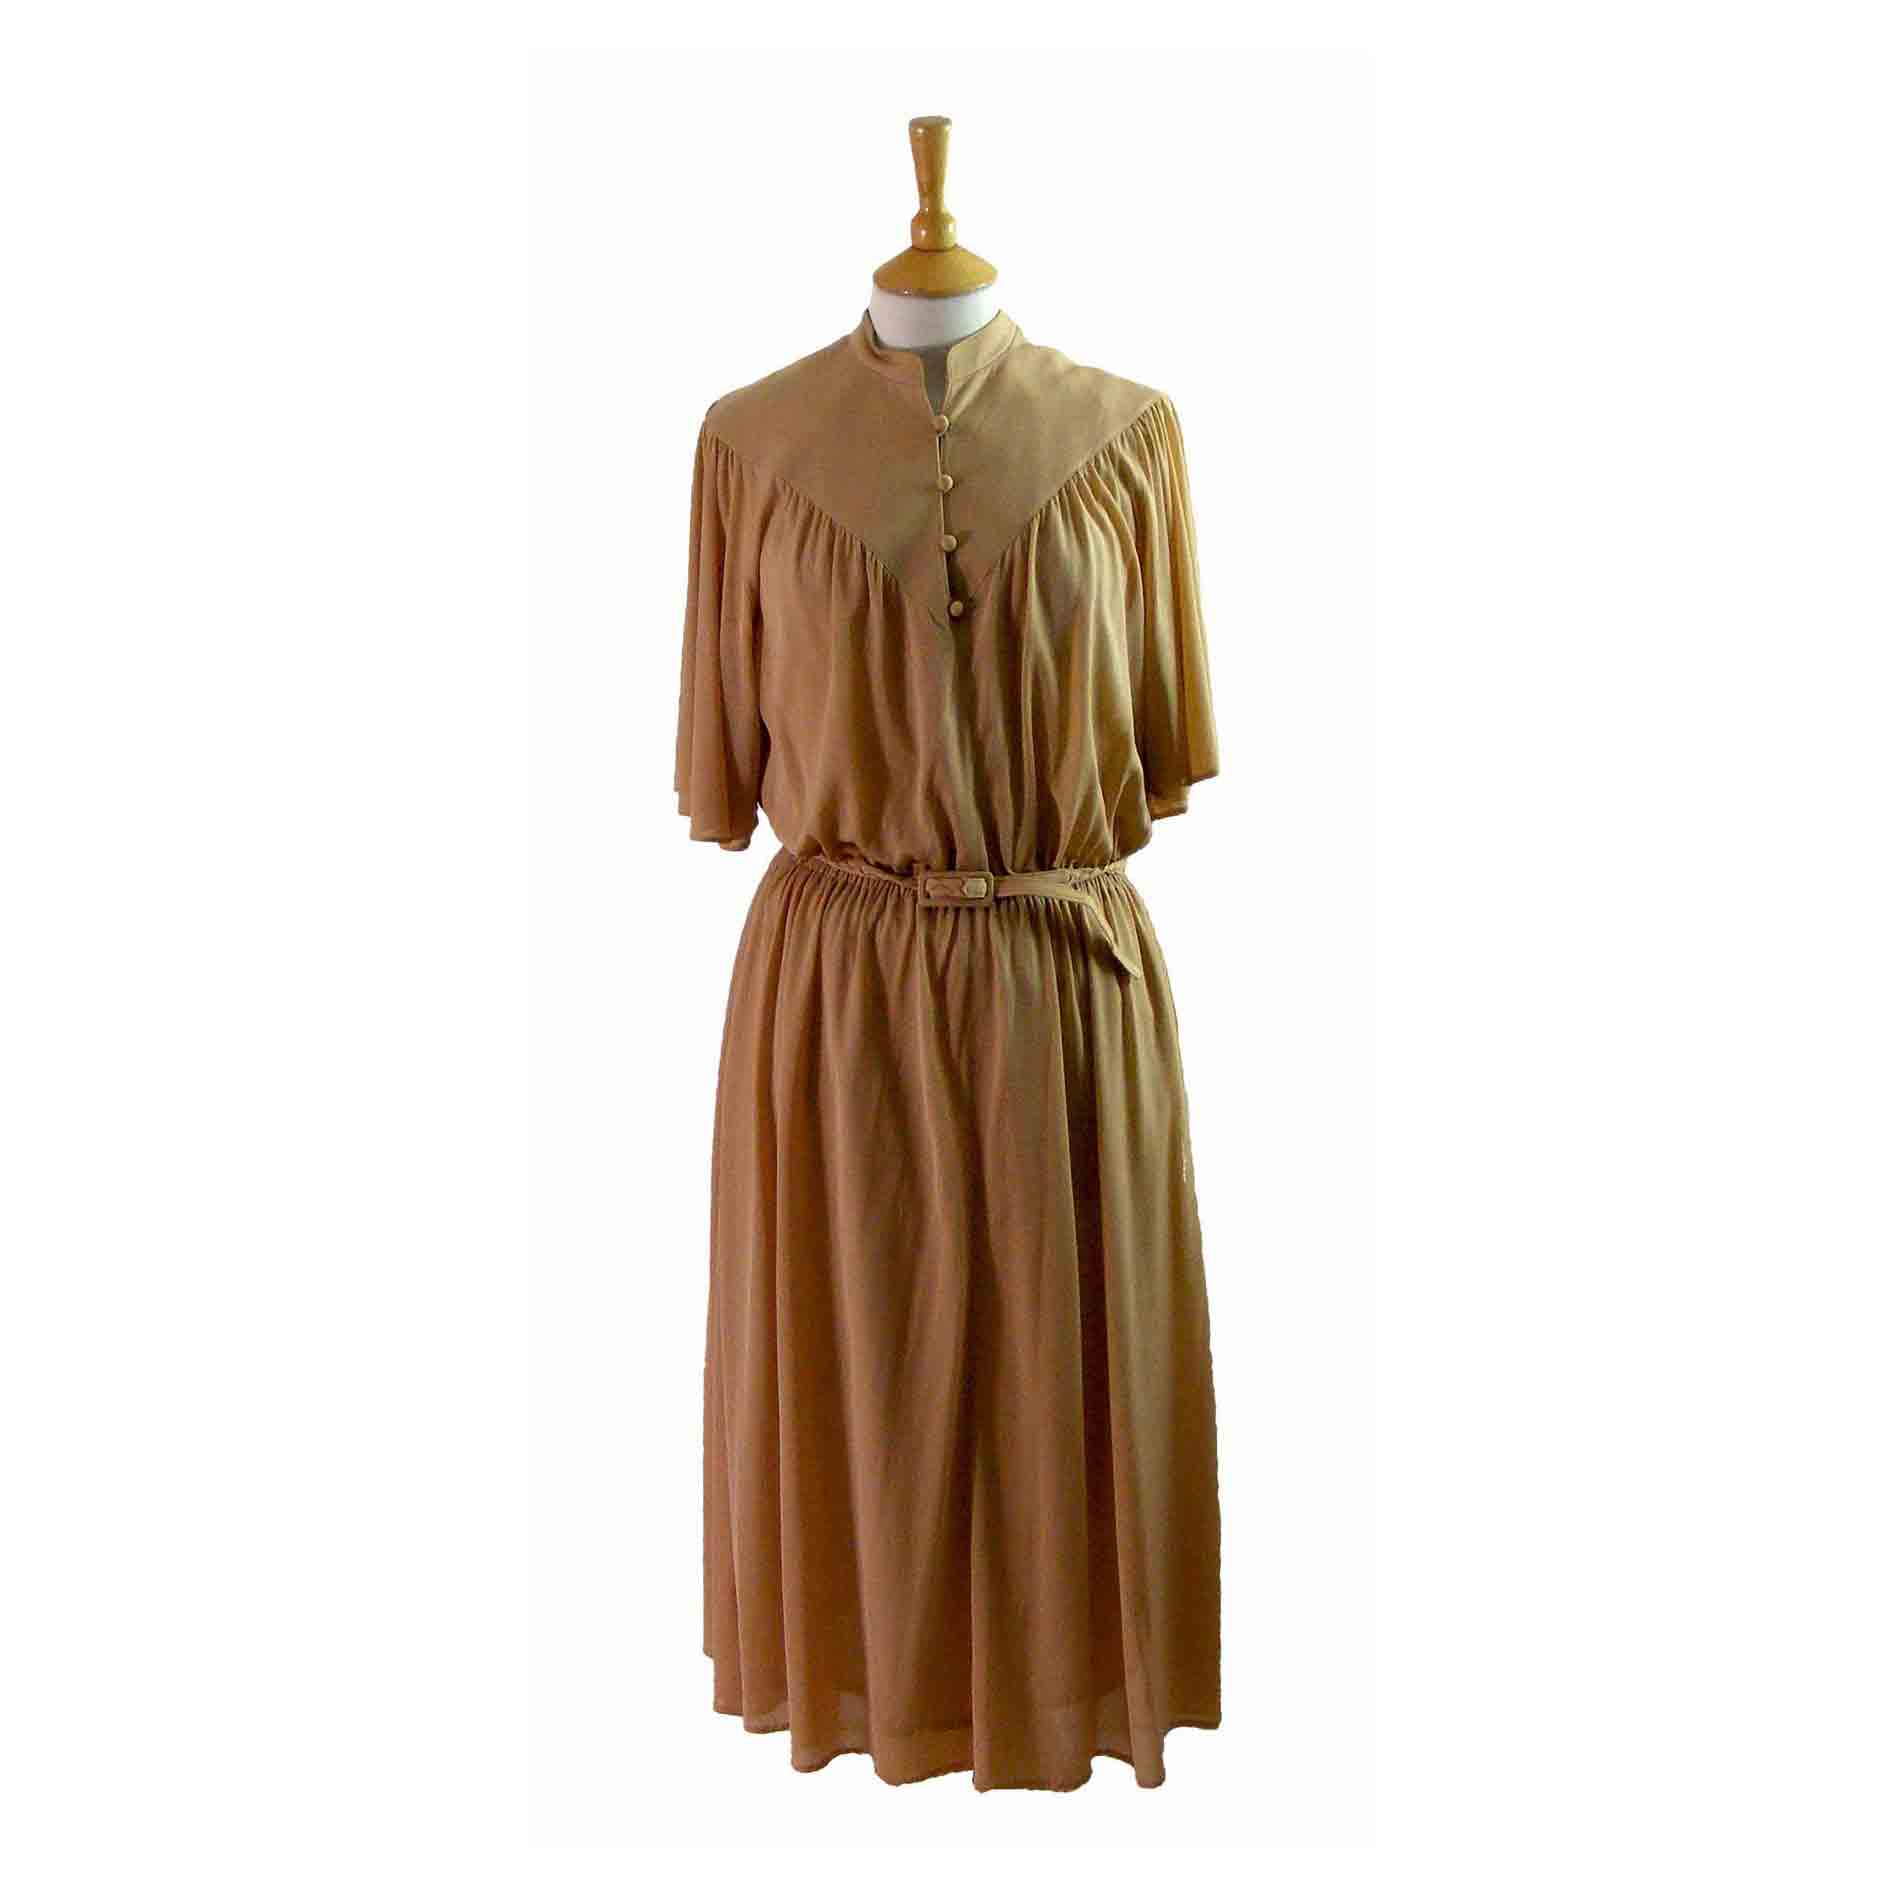 80s Light Brown Pleated Dress - 12 - Blue 17 Vintage Clothing